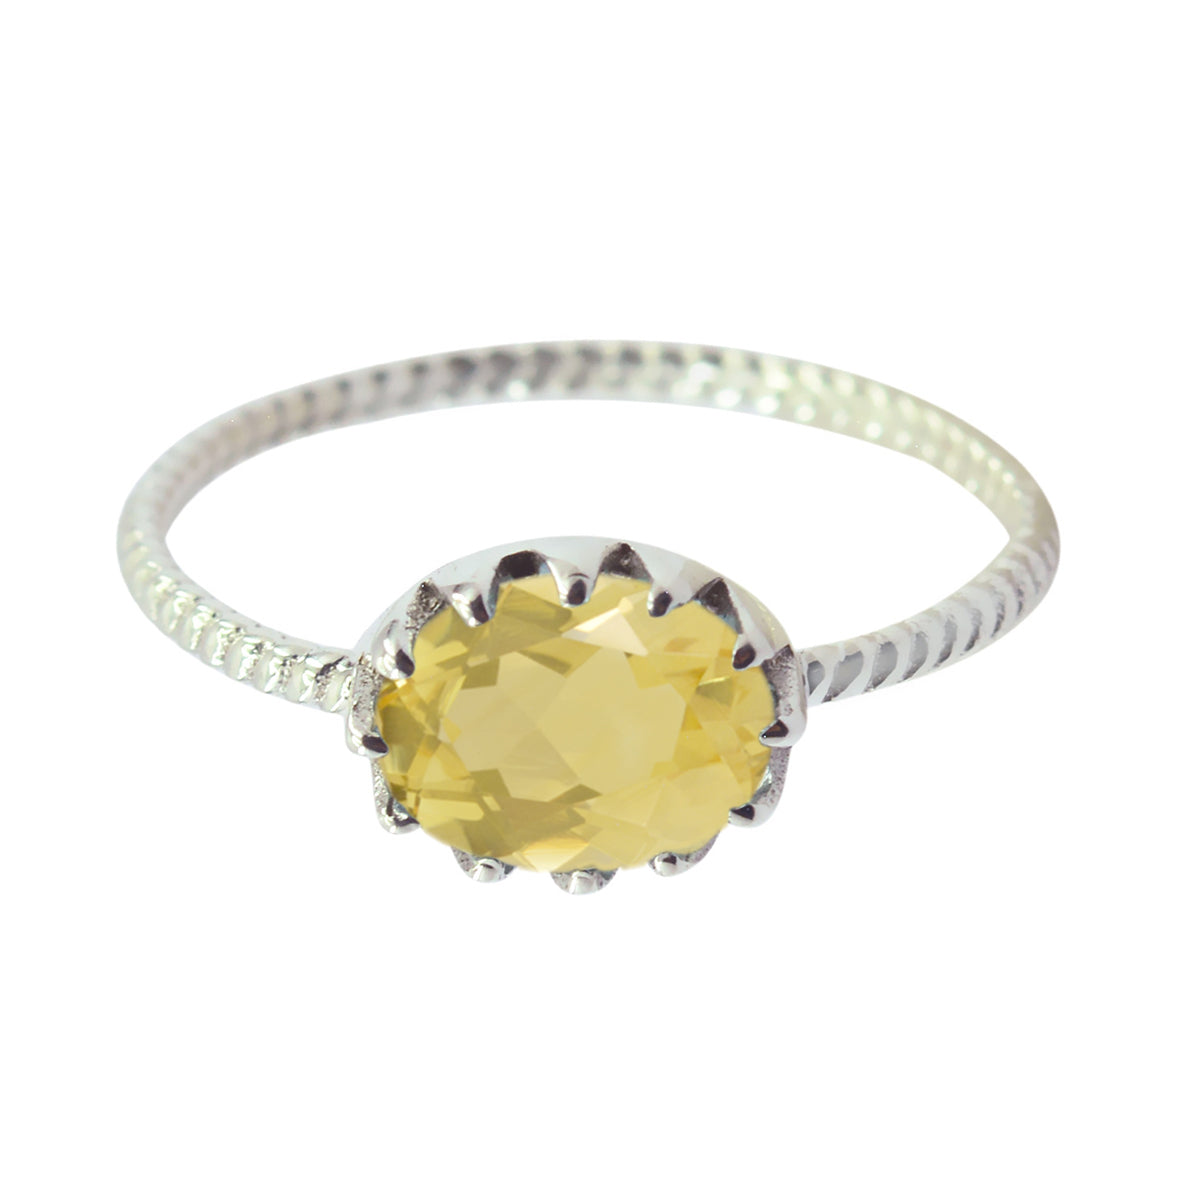 Charming Gem Citrine Sterling Silver Ring Silver Jewelry Cleaner